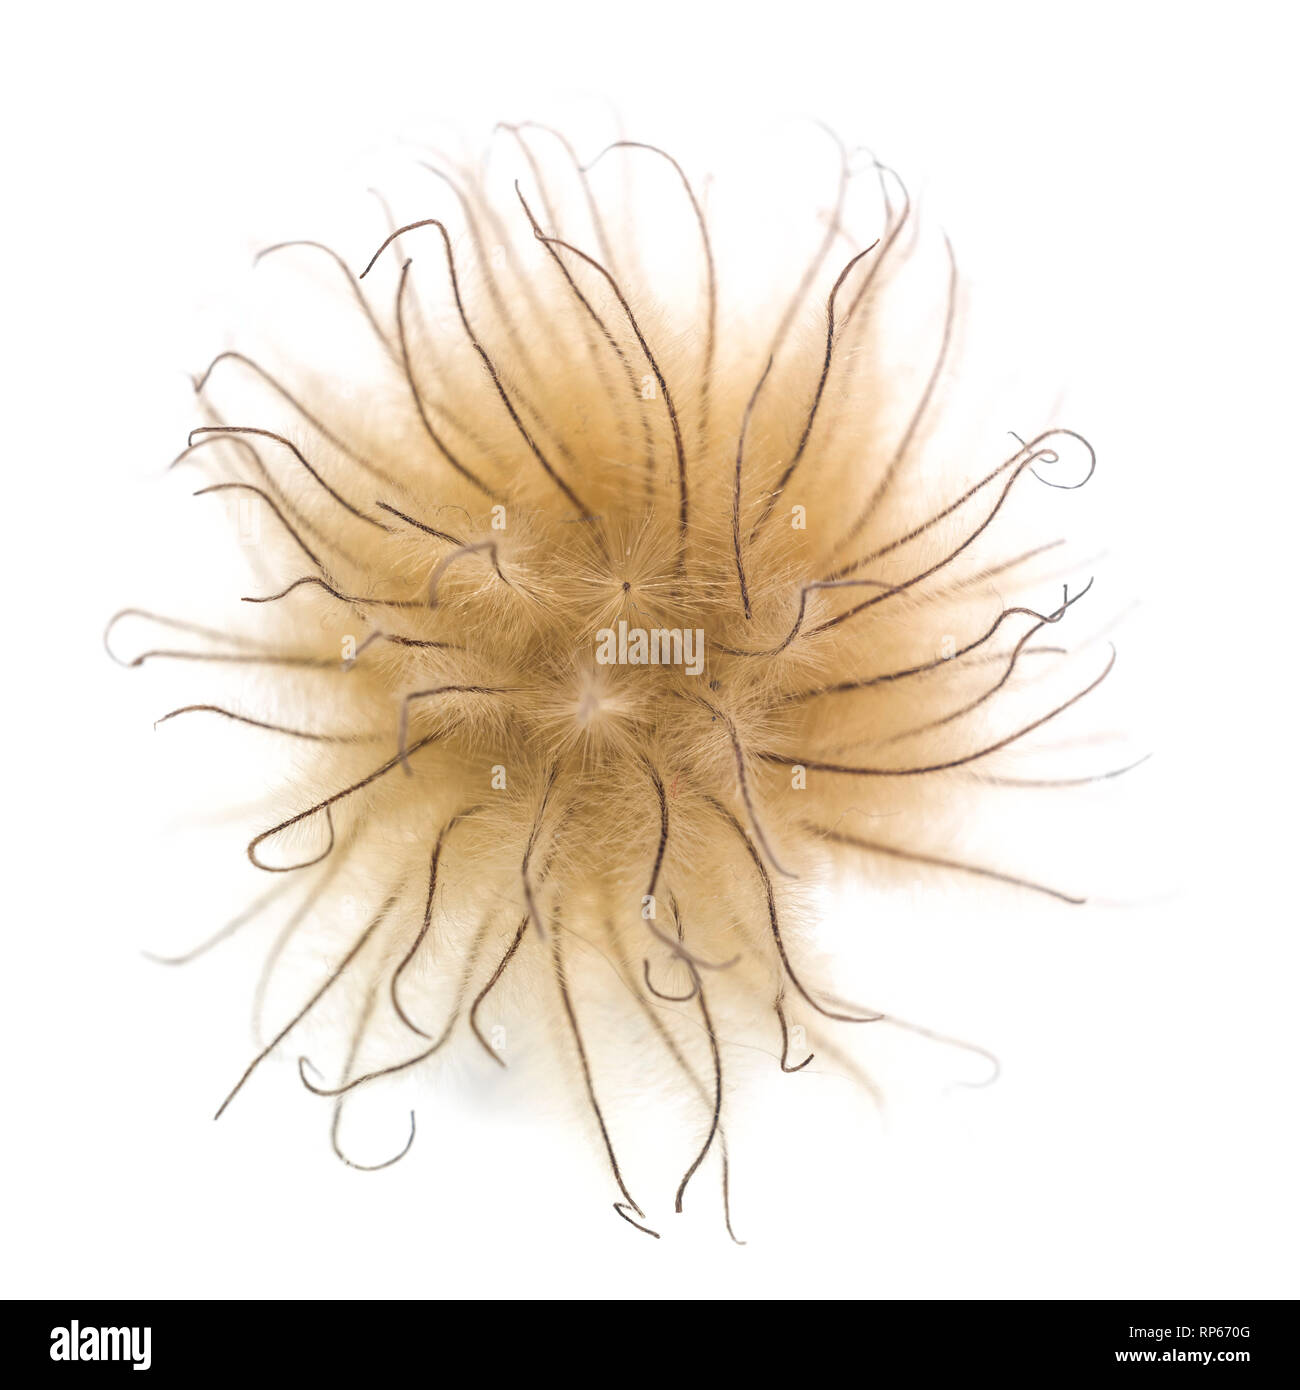 Clematis Seed Head against White Background, High Angle View Stock Photo